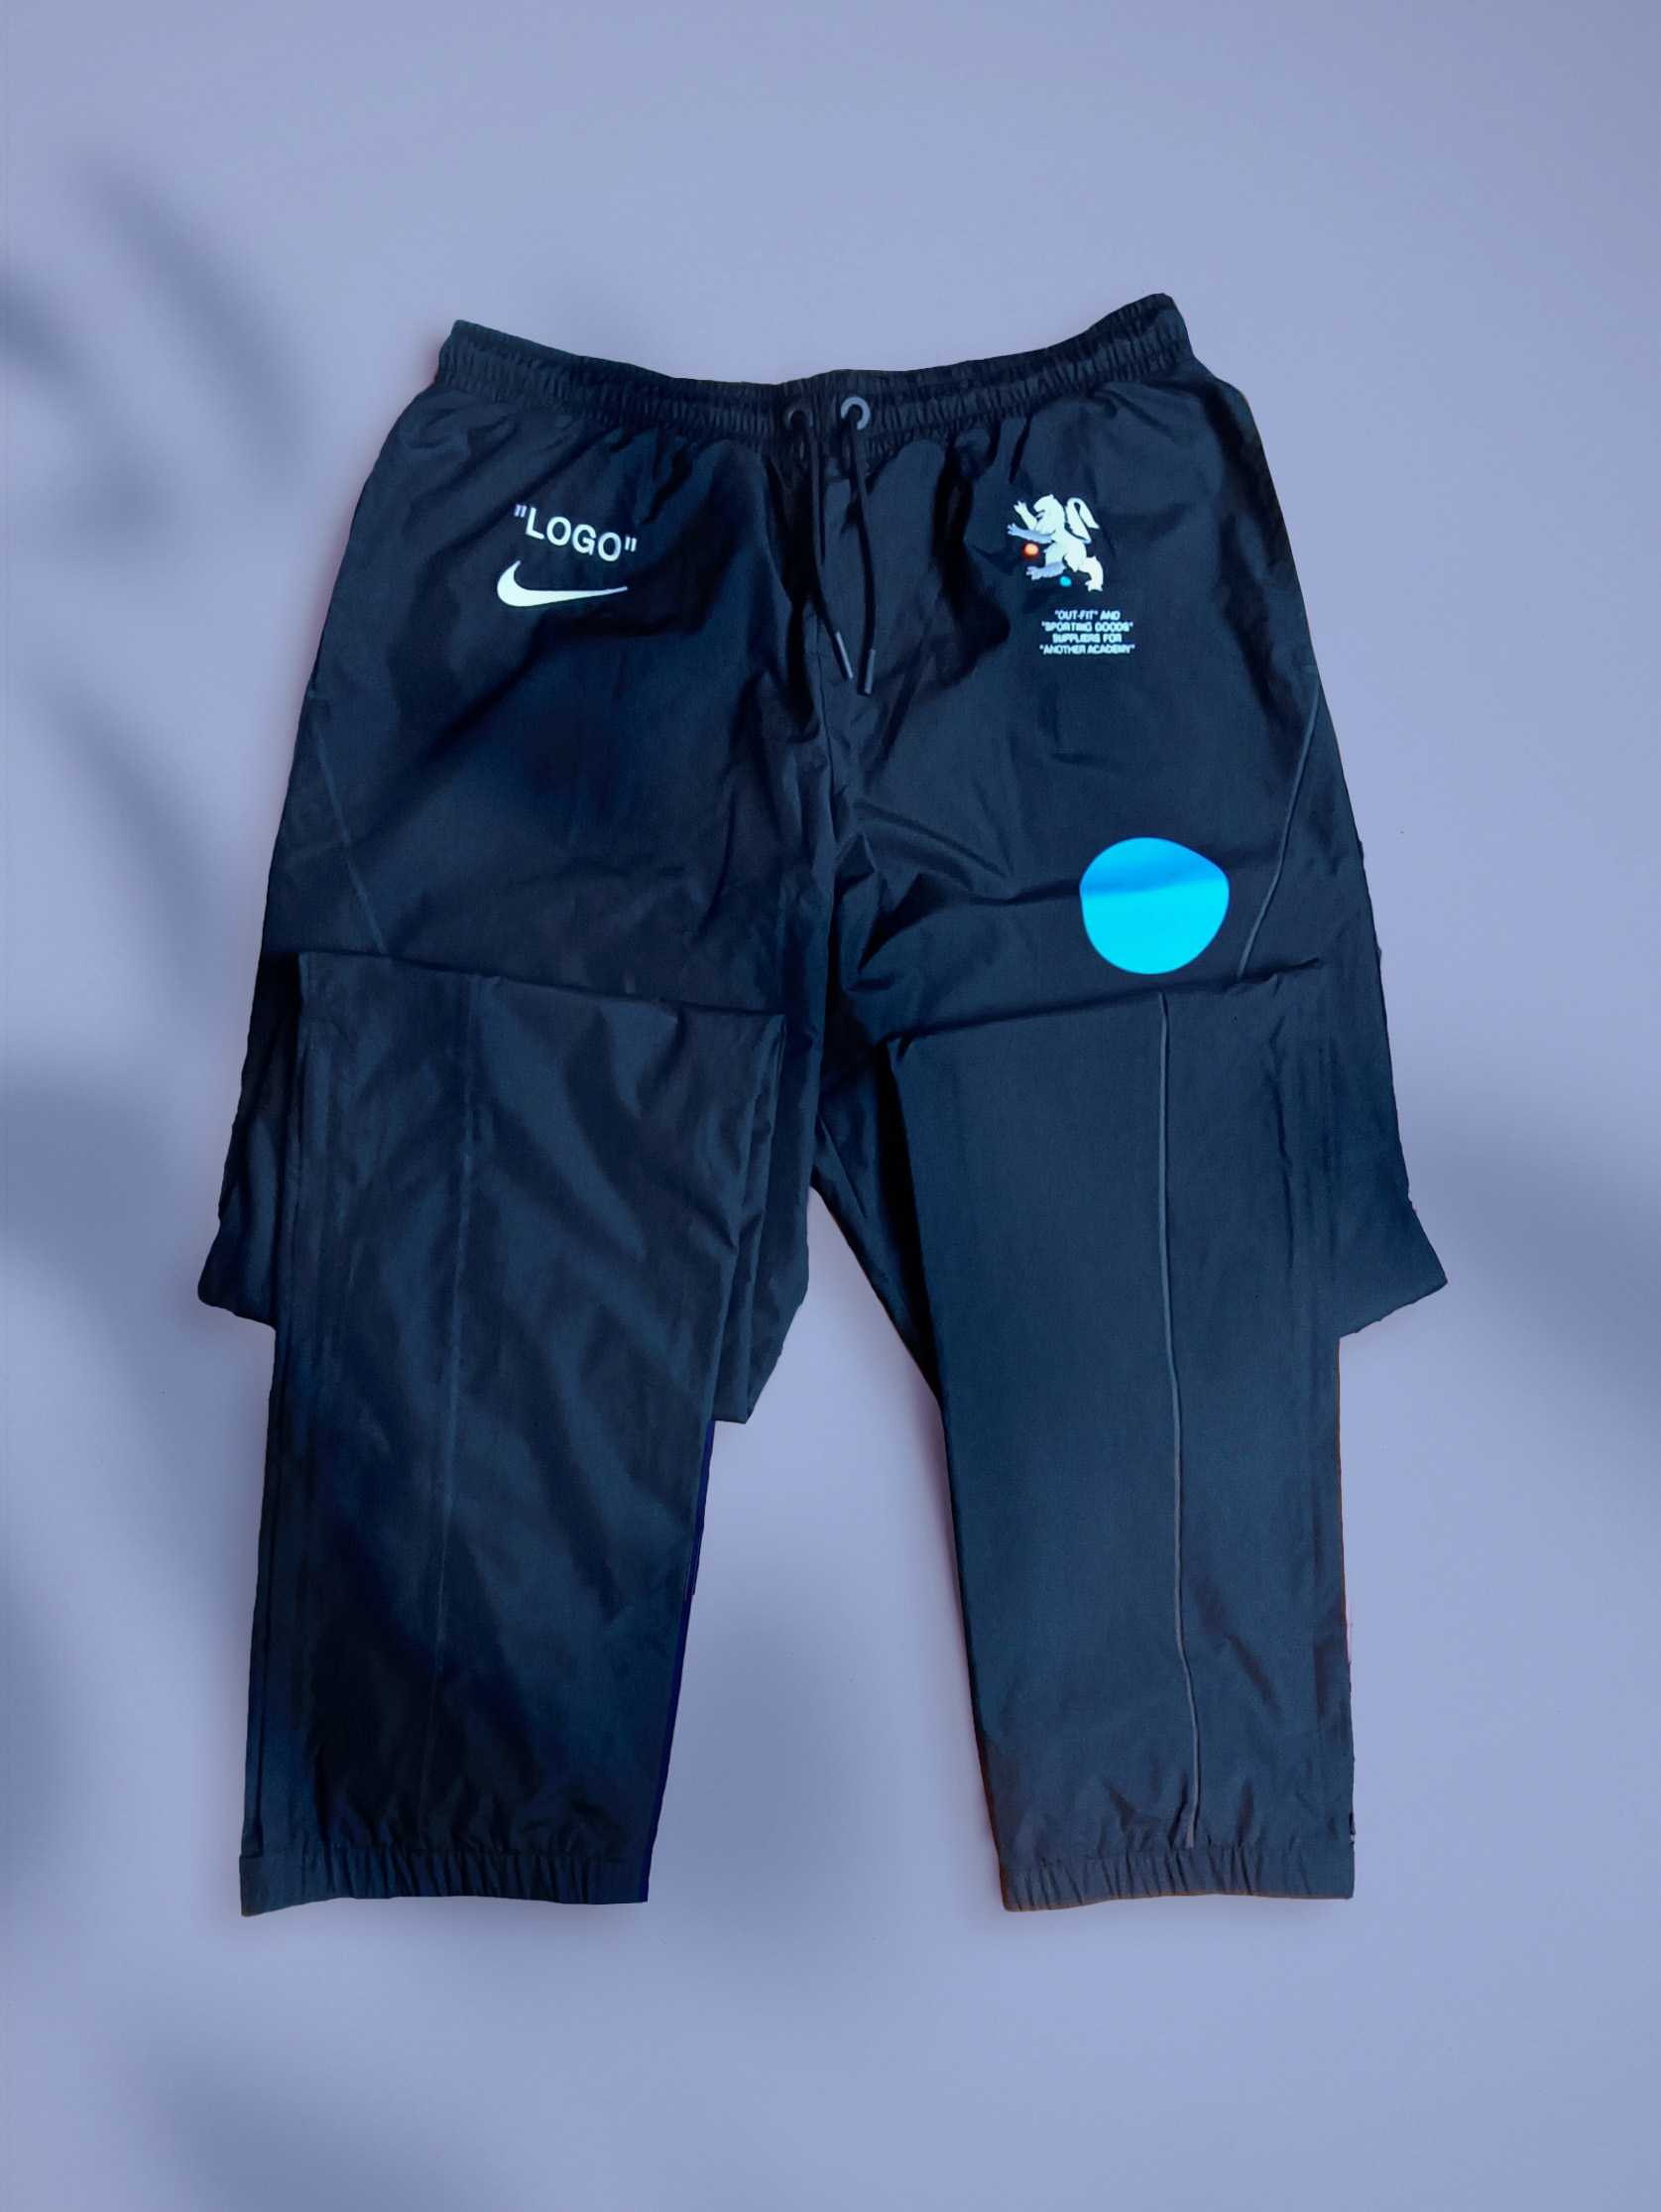 Nike Lab x Off White Track Pants "FOOTBALL, MON AMOUR" SS18 - 1